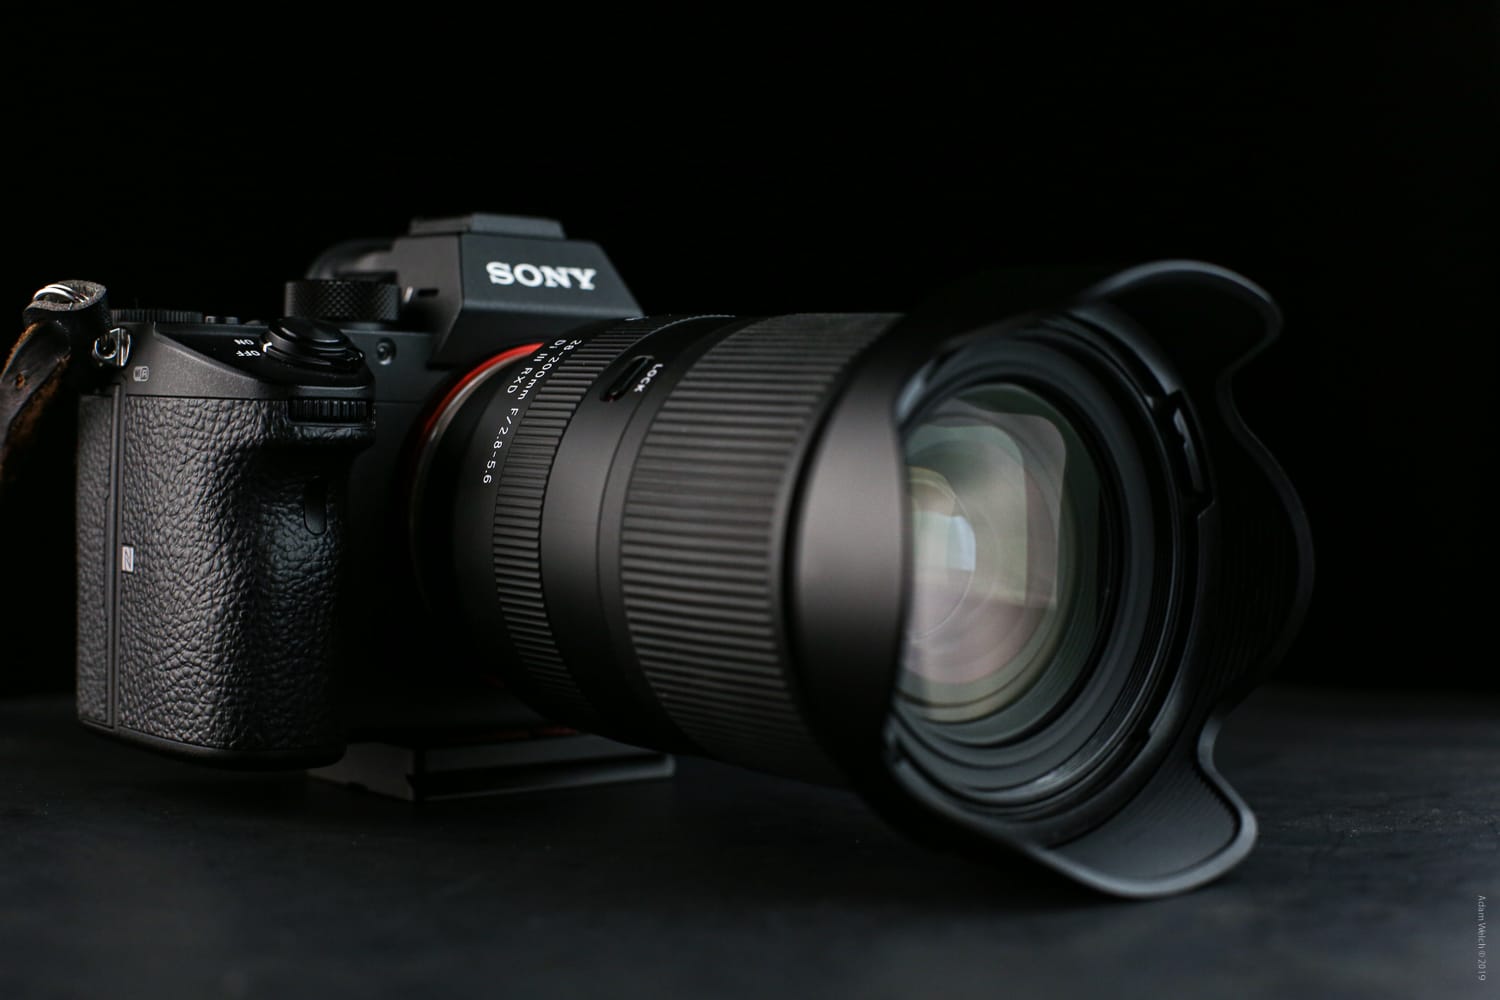 Detailed Review of the Tamron 28-200mm f/2.8-5.6 Di III RXD Full-Frame E-Mount Lens